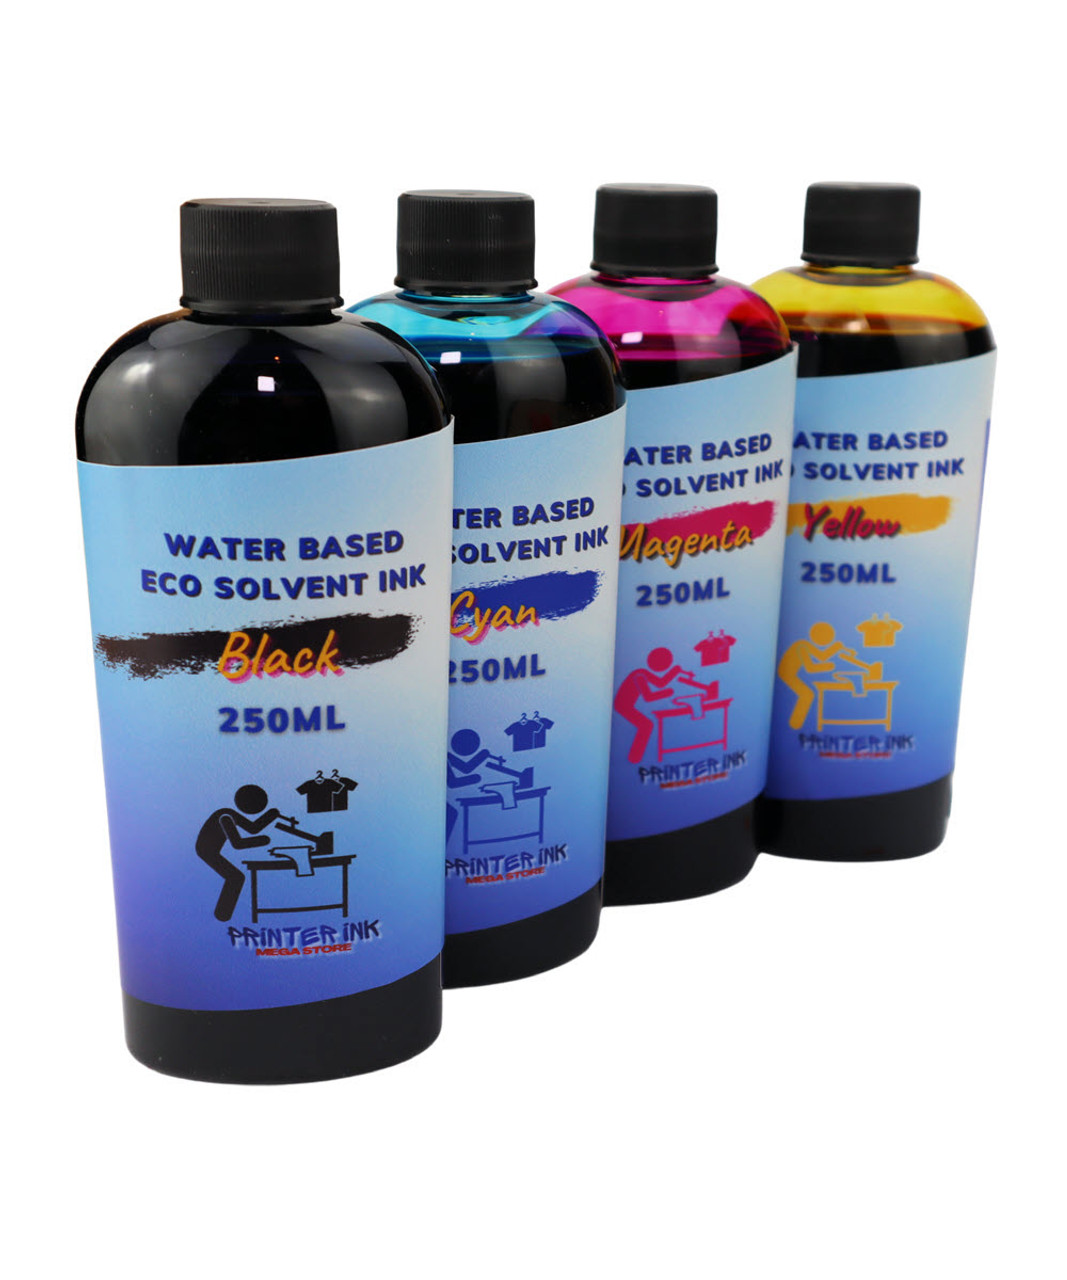 Water Based Eco Solvent Ink 4- 250ml bottles for Epson WorkForce WF-2630 WF-2650 printers